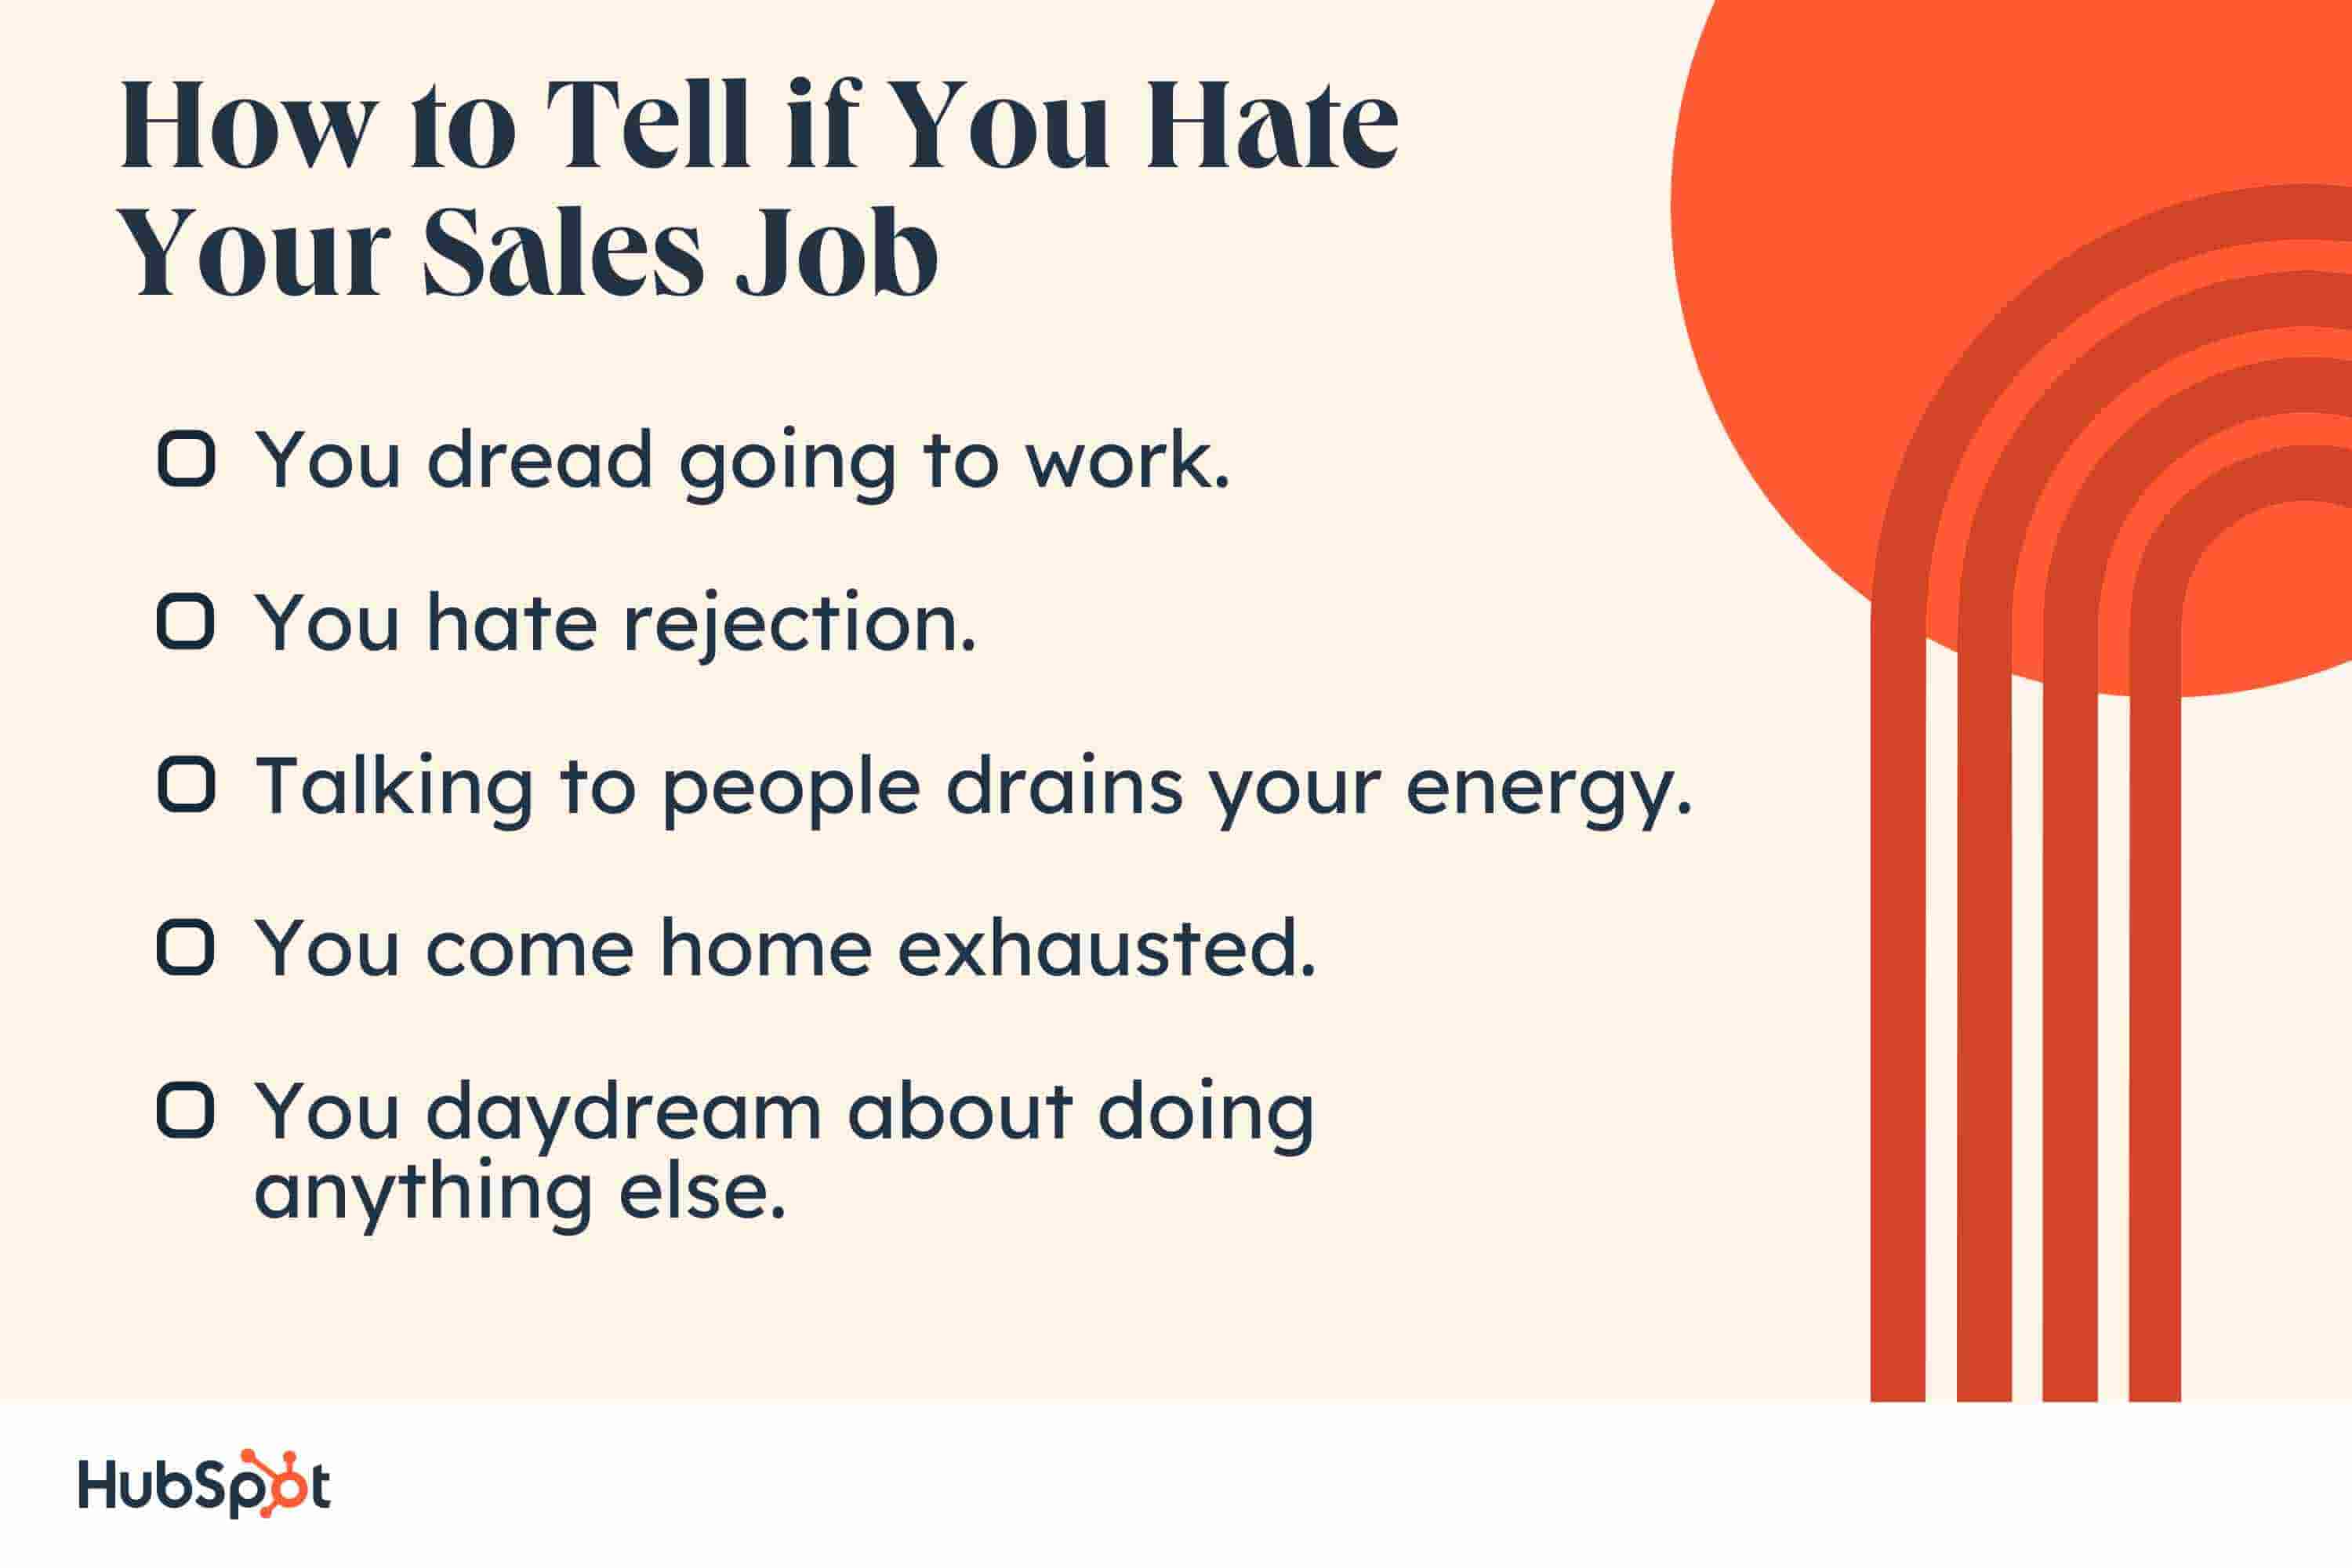 I hate sales, signs that you hate your job. You dread going to work. You hate rejection. Talking to people drains you. You come home exhausted. You daydream about anything else.